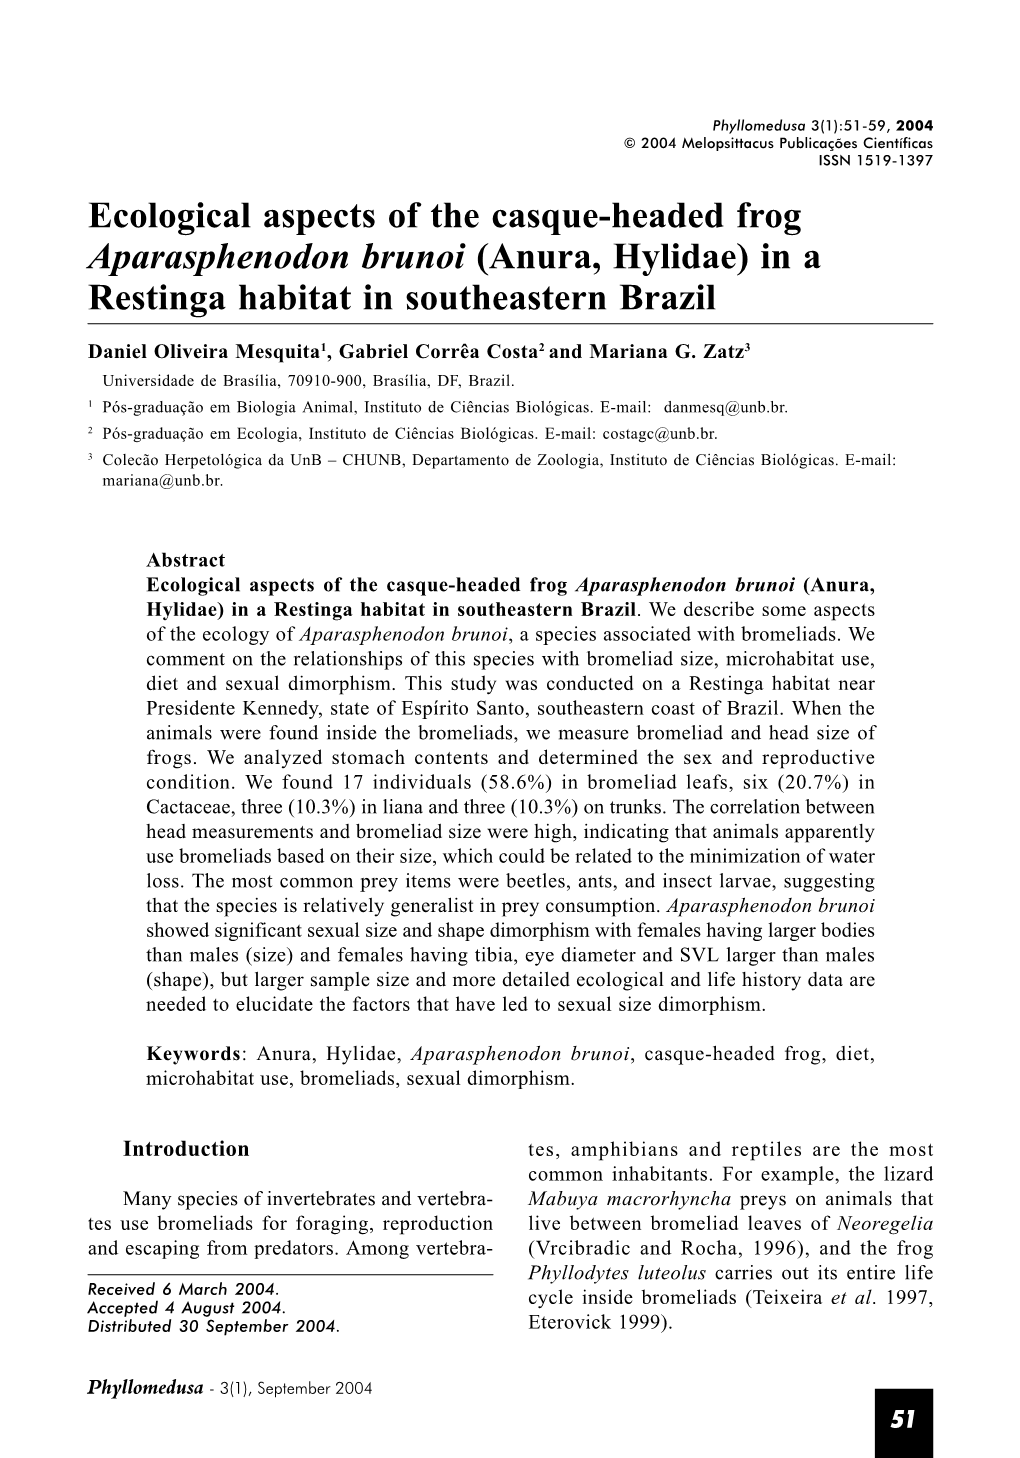 Ecological Aspects of the Casque-Headed Frog Aparasphenodon Brunoi (Anura, Hylidae) in a Restinga Habitat in Southeastern Brazil